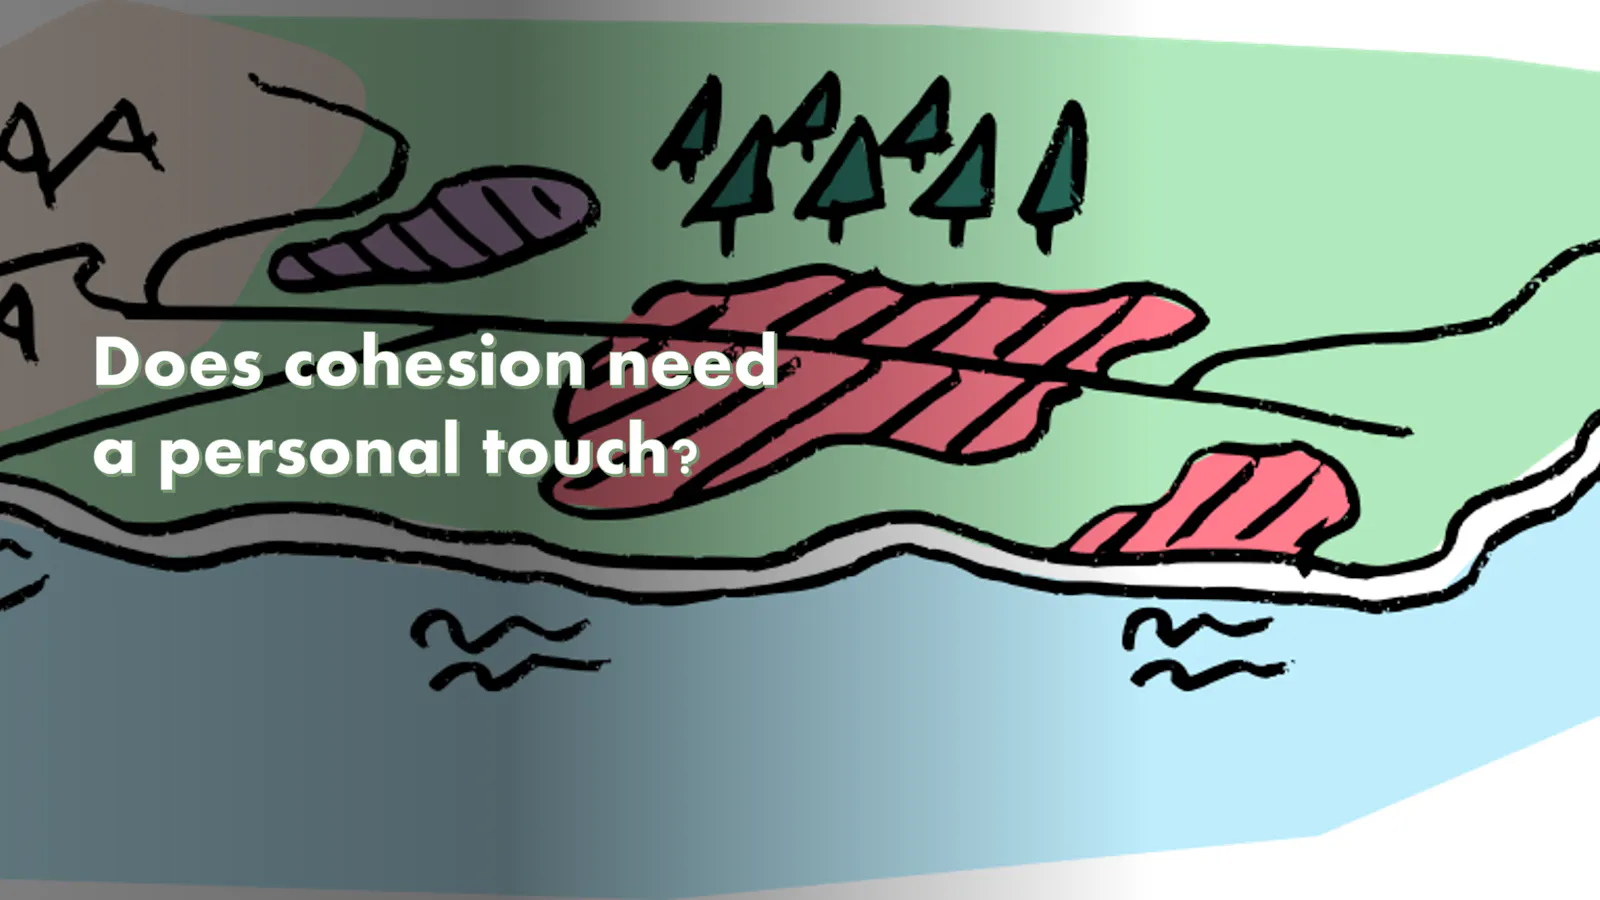 Does cohesion need a personal touch?